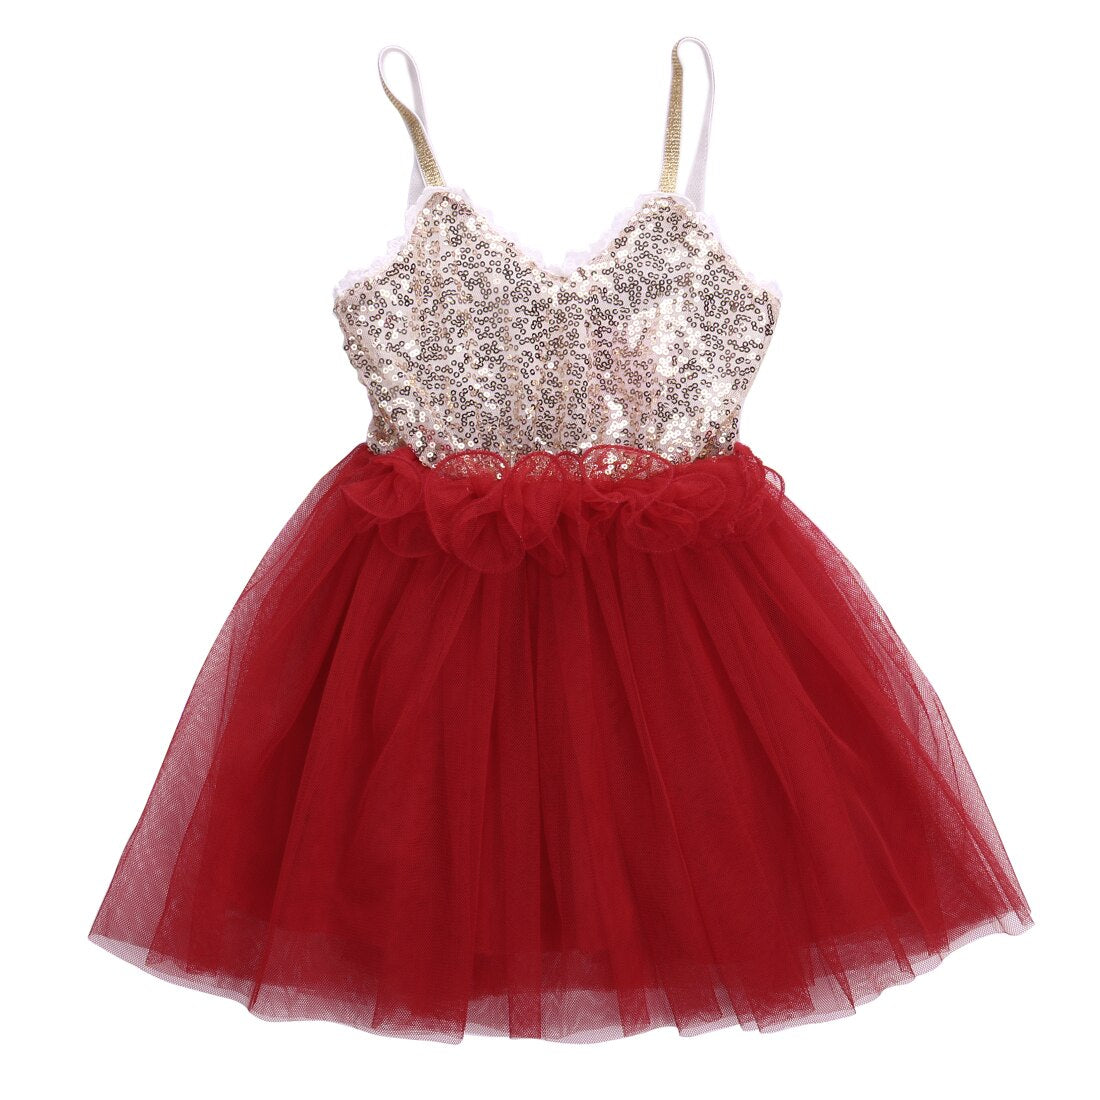 4colors Sequins Princess Baby Girl Dress Lace Tulle Party Gown Fancy Dresses Birthday - ebowsos